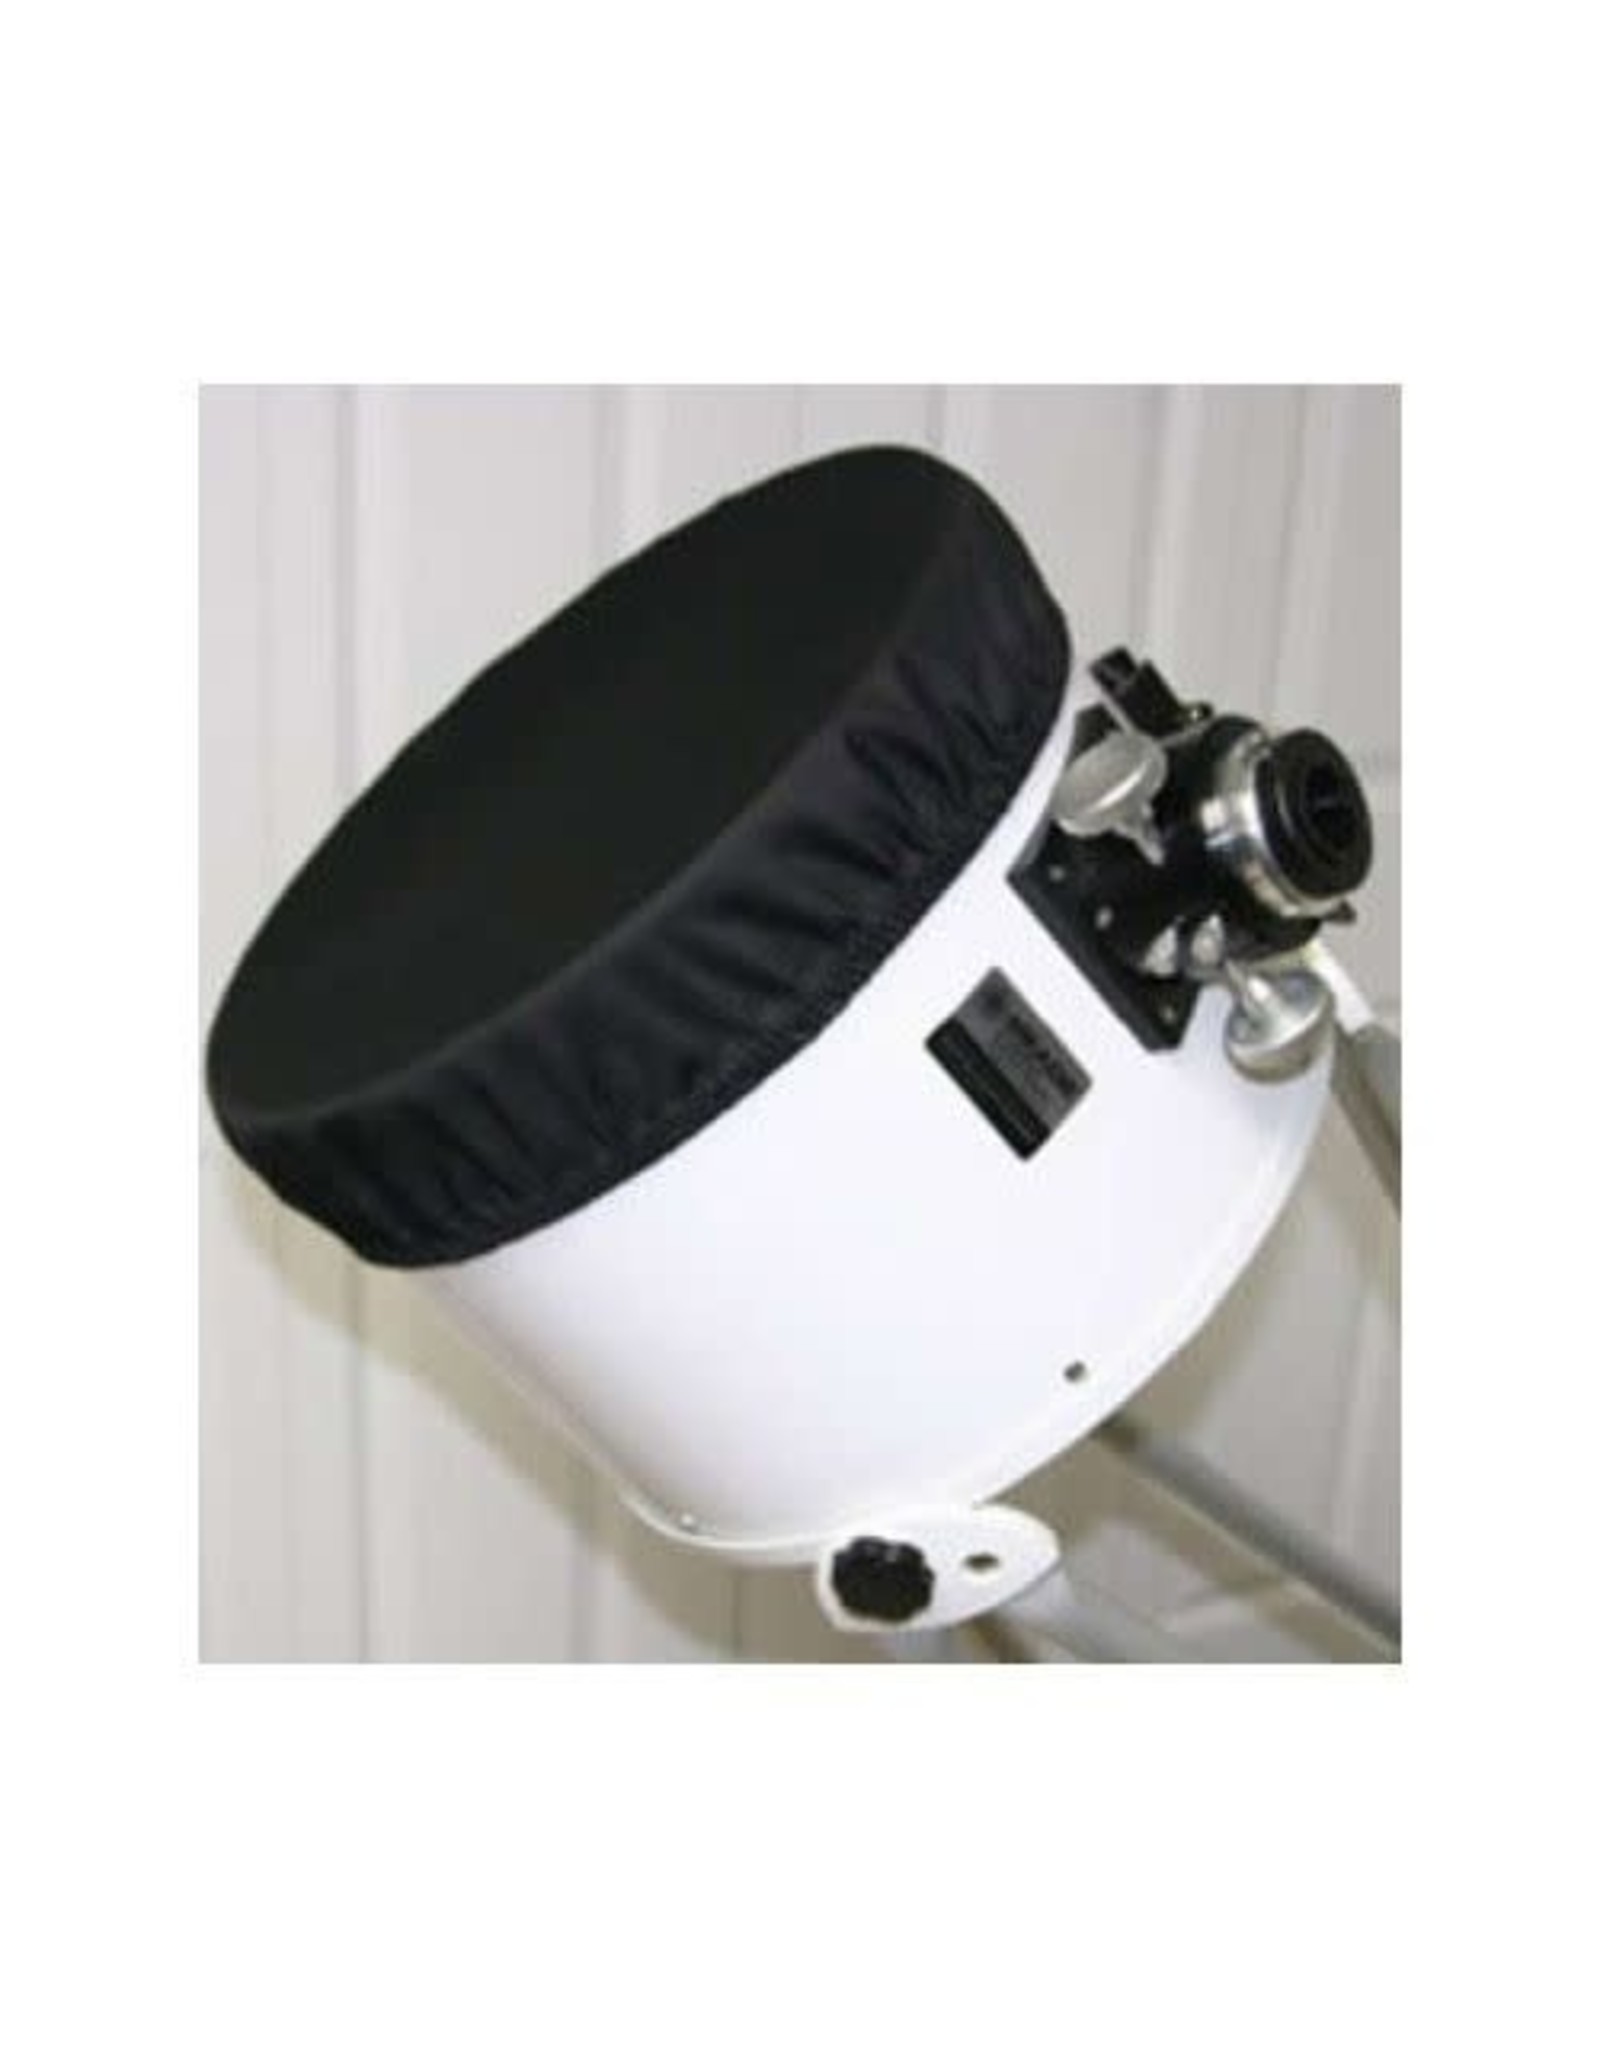 Astrozap AstroZap 14" Dust Cover for Telescopes and Dew Shields